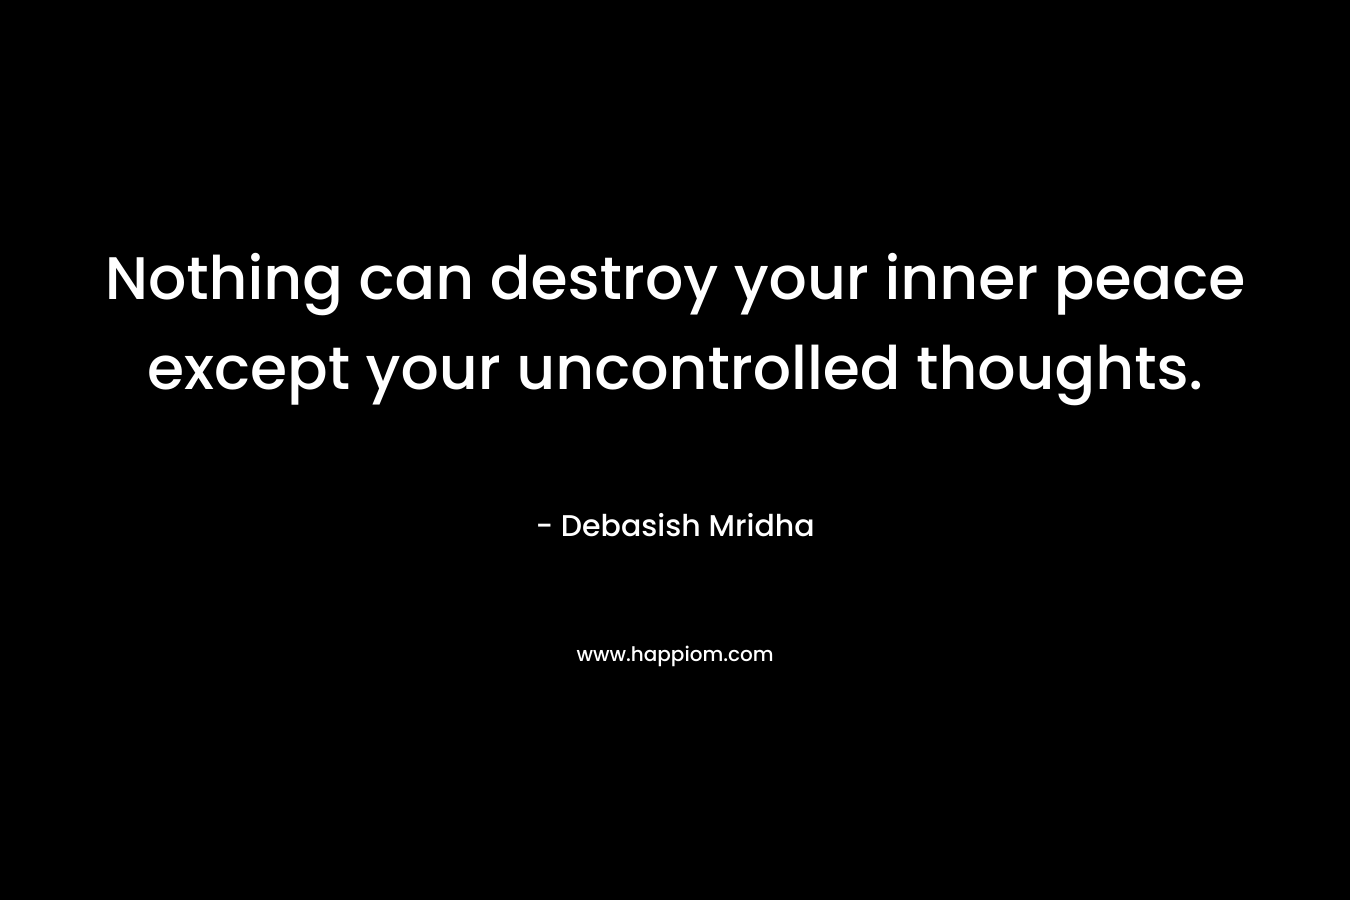 Nothing can destroy your inner peace except your uncontrolled thoughts.